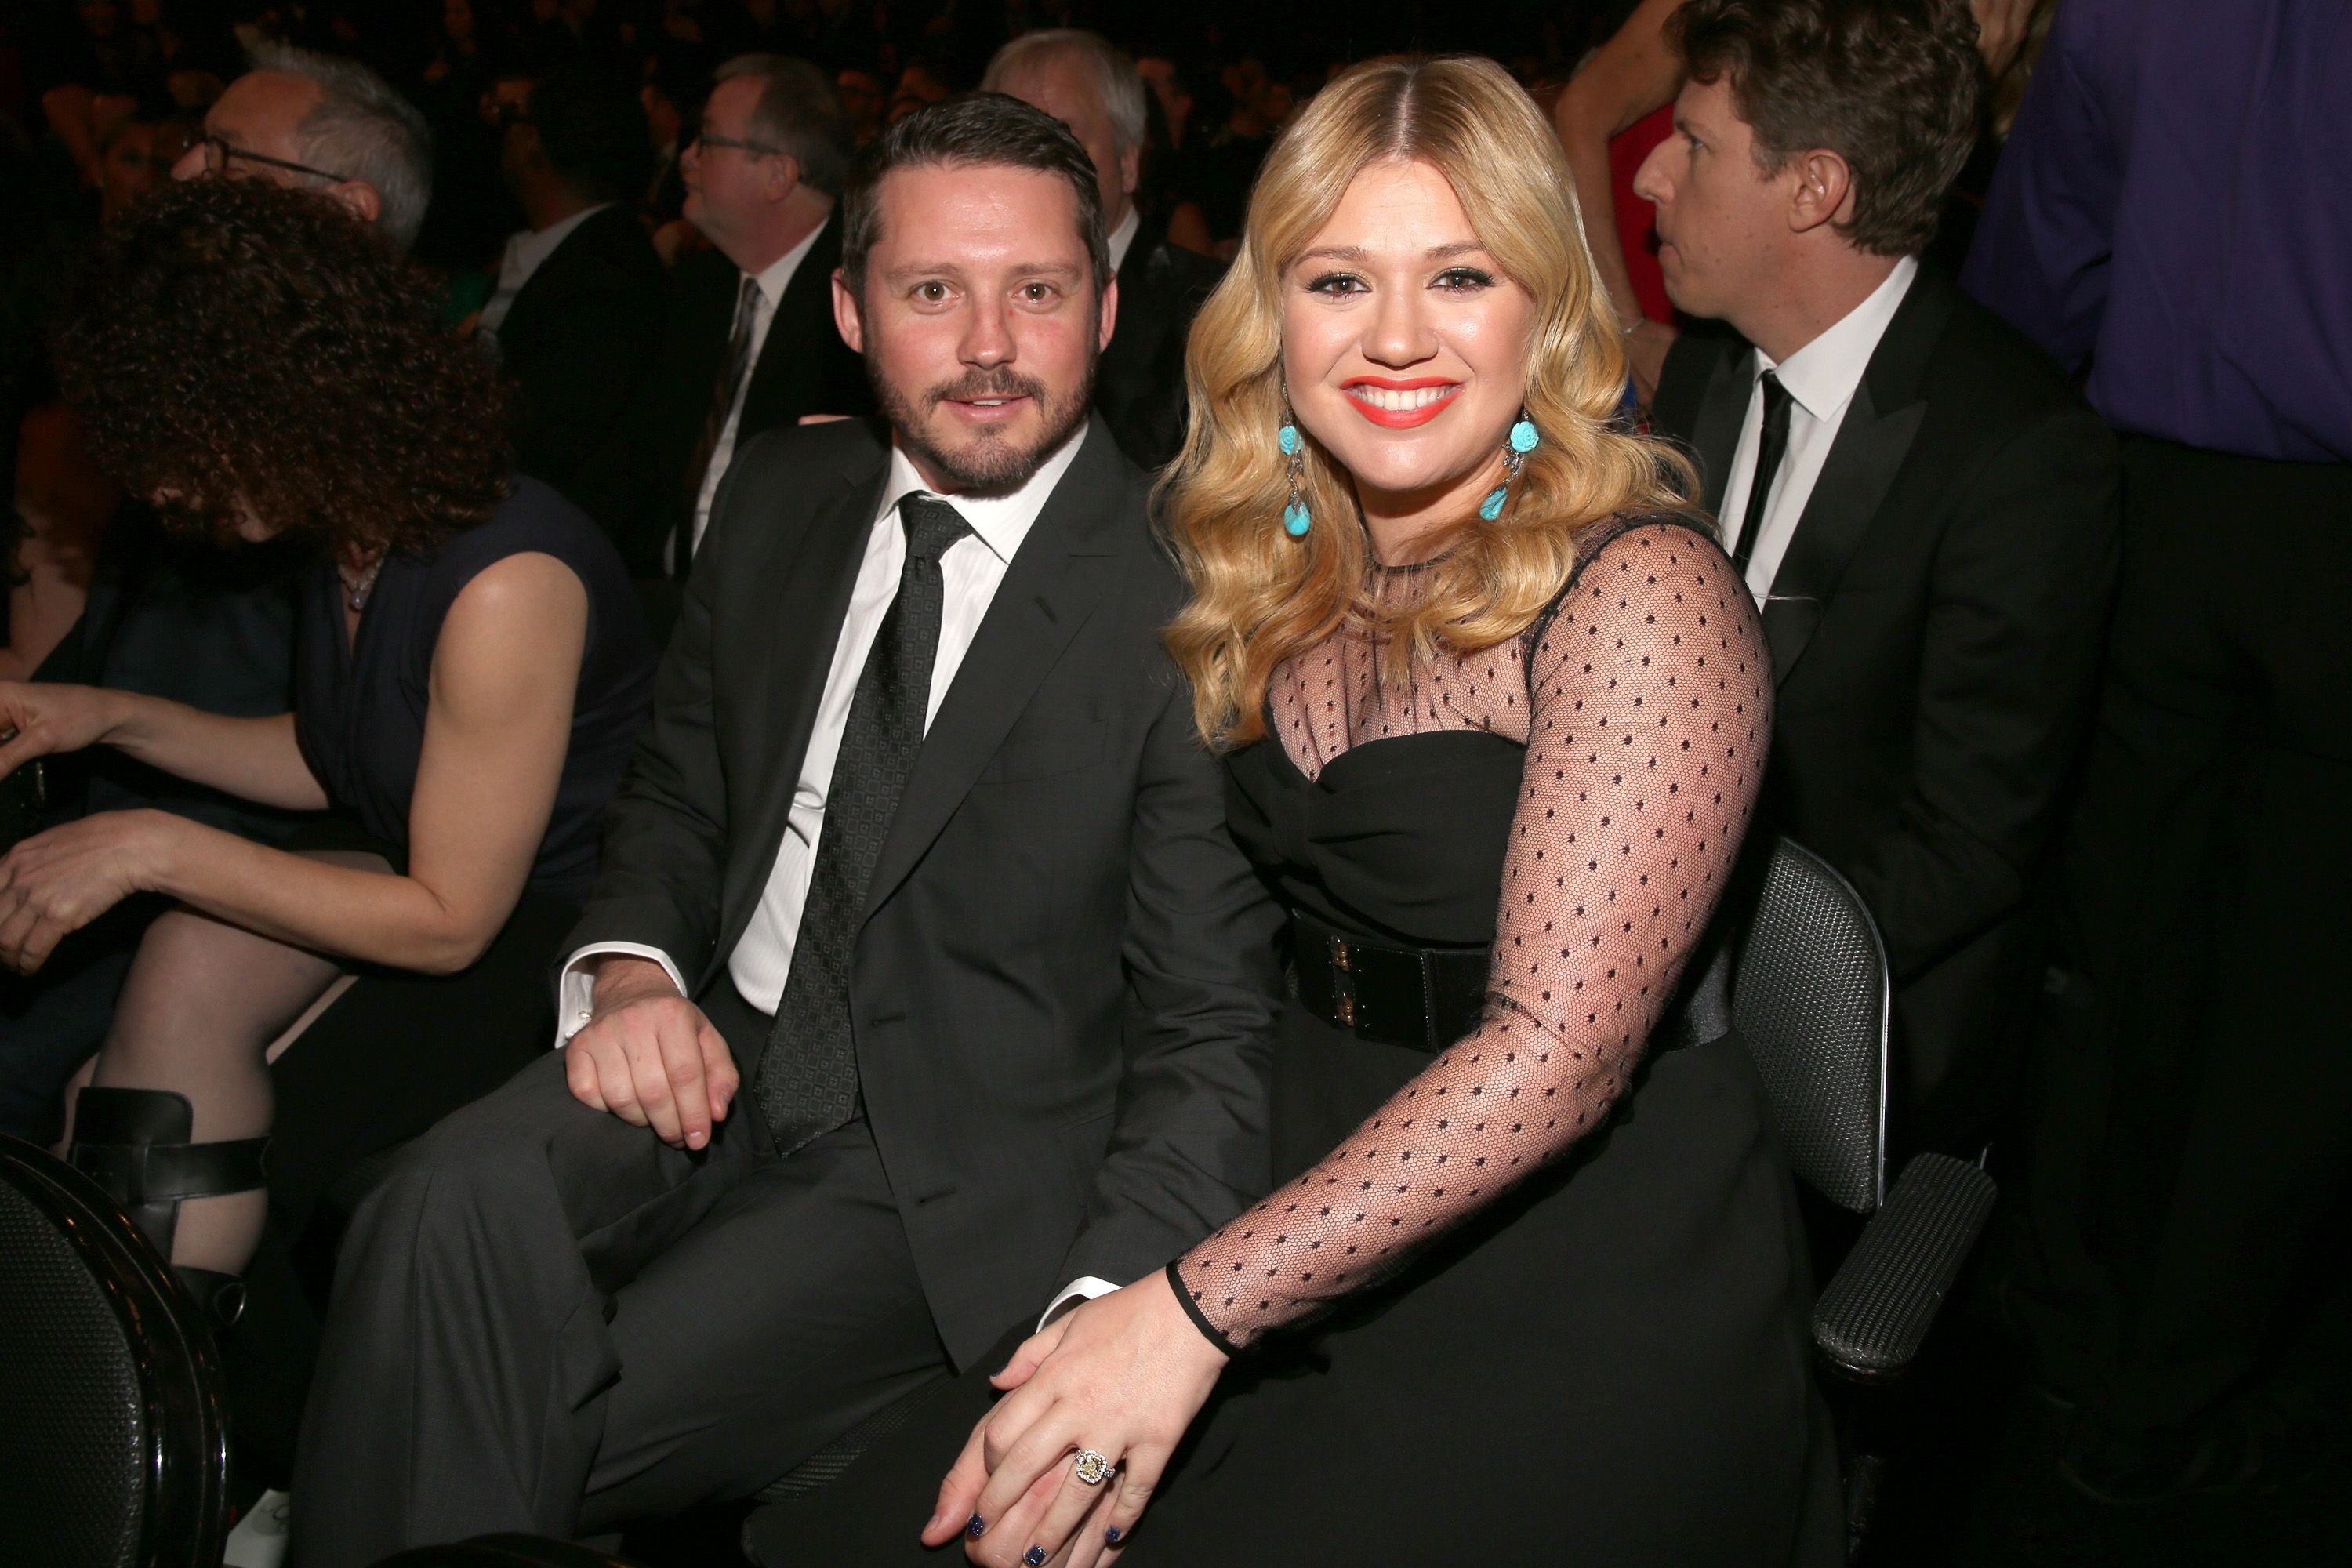 Kelly Clarkson and Brandon Blackstock at the 55th Annual GRAMMY Awards at STAPLES Center on February 10, 2013 | Photo: Getty Images